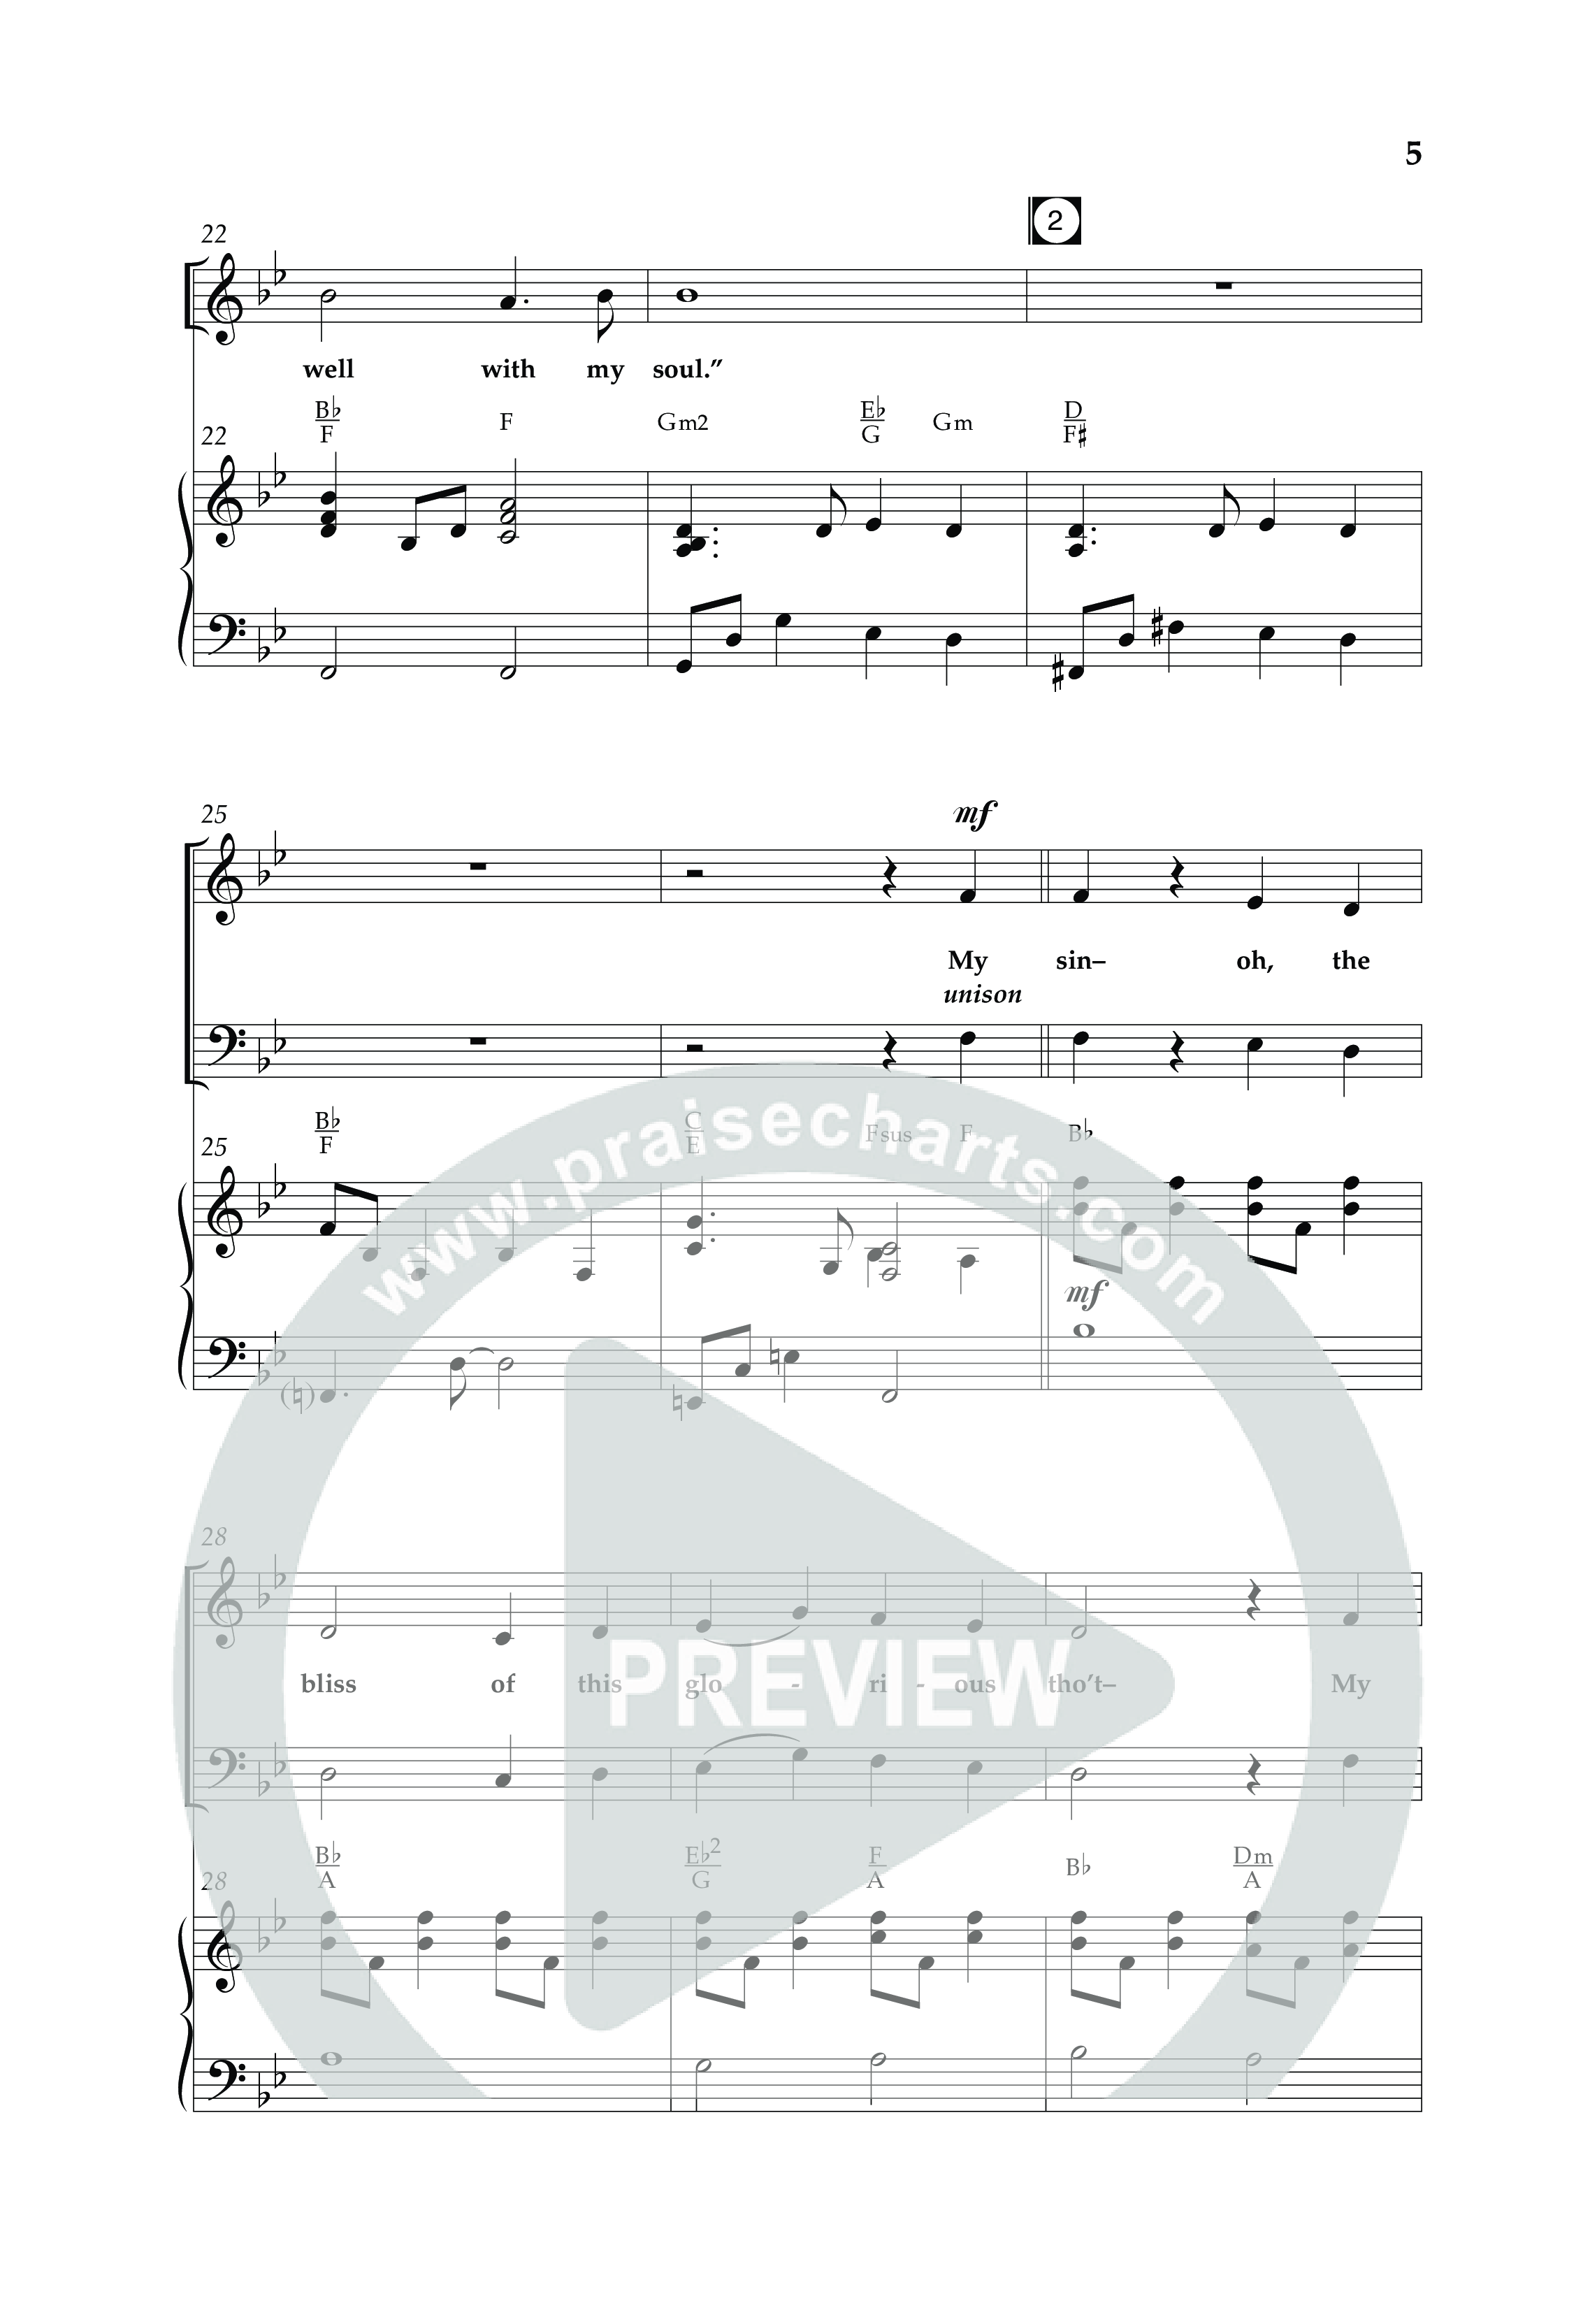 It Is Well (Choral Anthem SATB) Anthem (SATB/Piano) (Lifeway Choral / Arr. Dave Williamson)